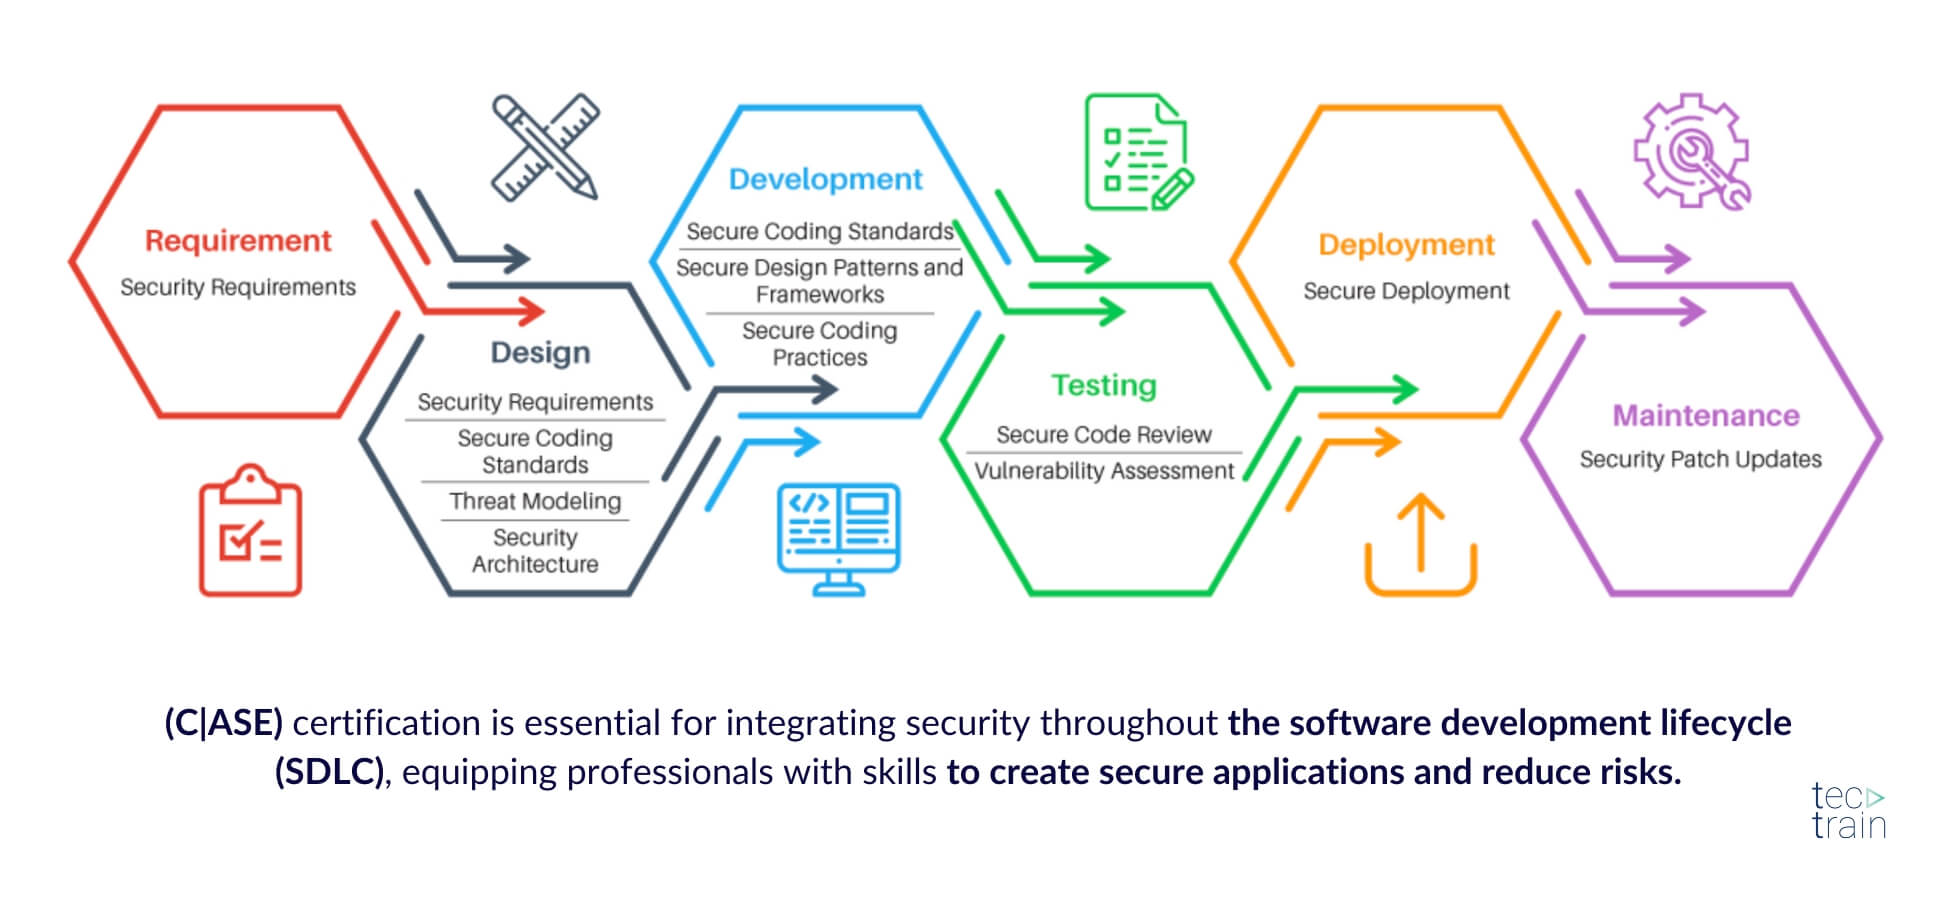 (C|ASE) certification is essential for integrating security throughout the software development lifecycle (SDLC), equipping professionals with skills to create secure applications and reduce risks.